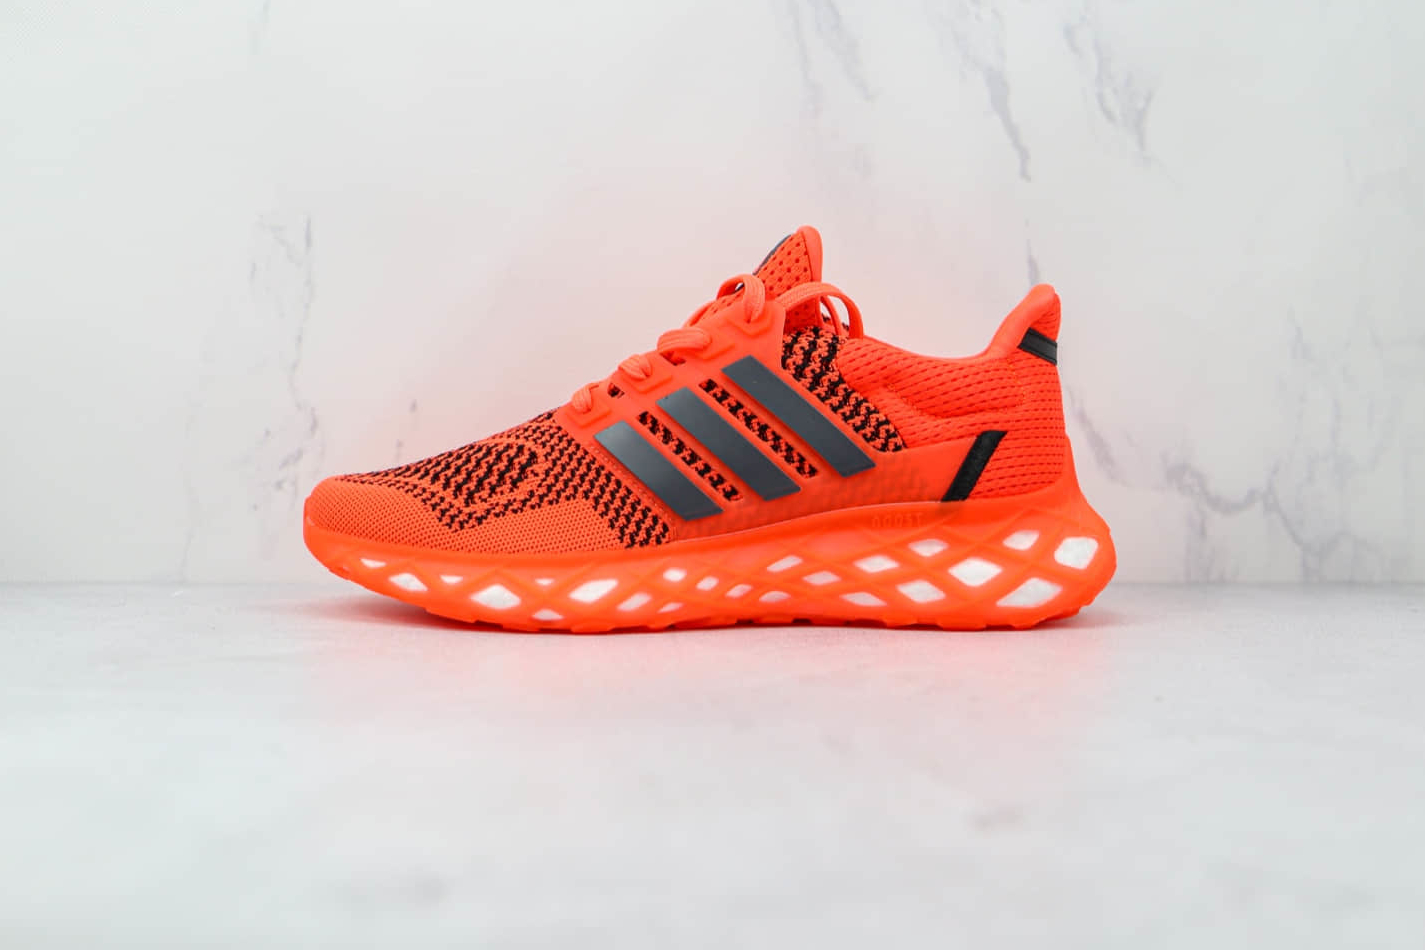 Adidas Ultraboost Web DNA 'Solar Red' GY4171 - Stylish and Performance-Driven Footwear